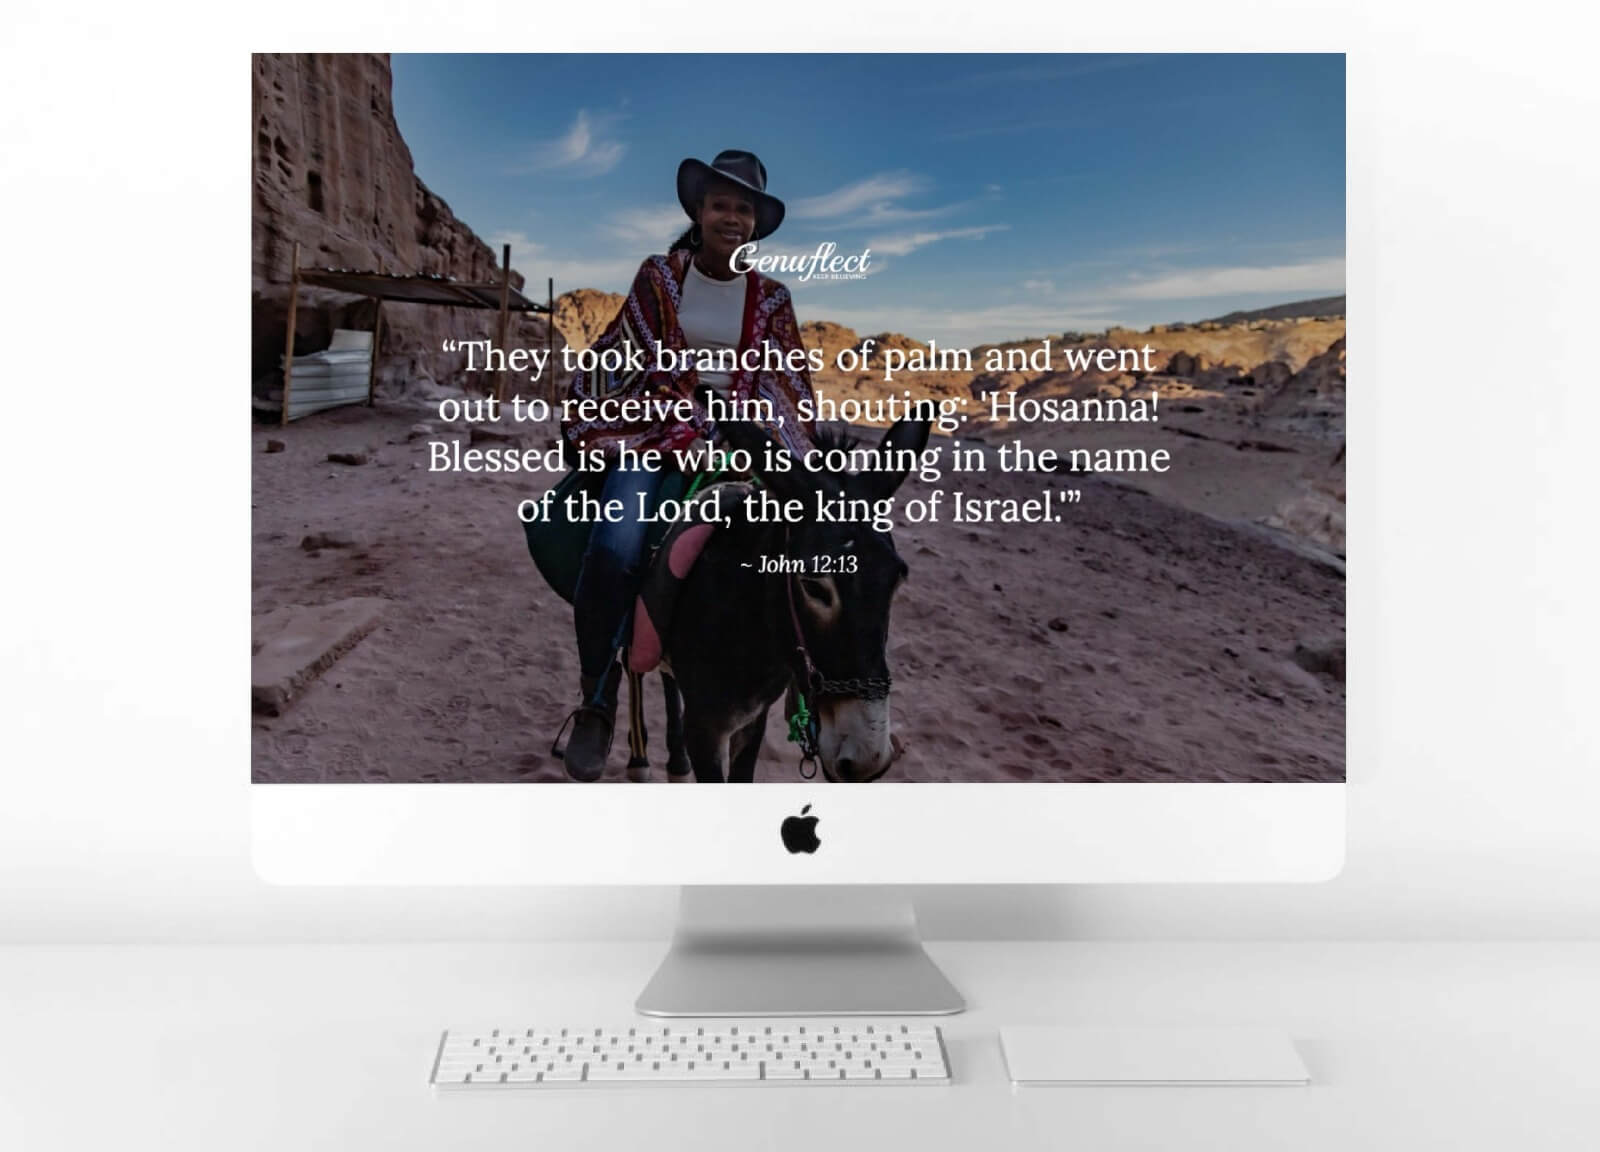 Genuflect computer background image of a Woman in a cowboy hat and pancho riding on a donkey in the desert